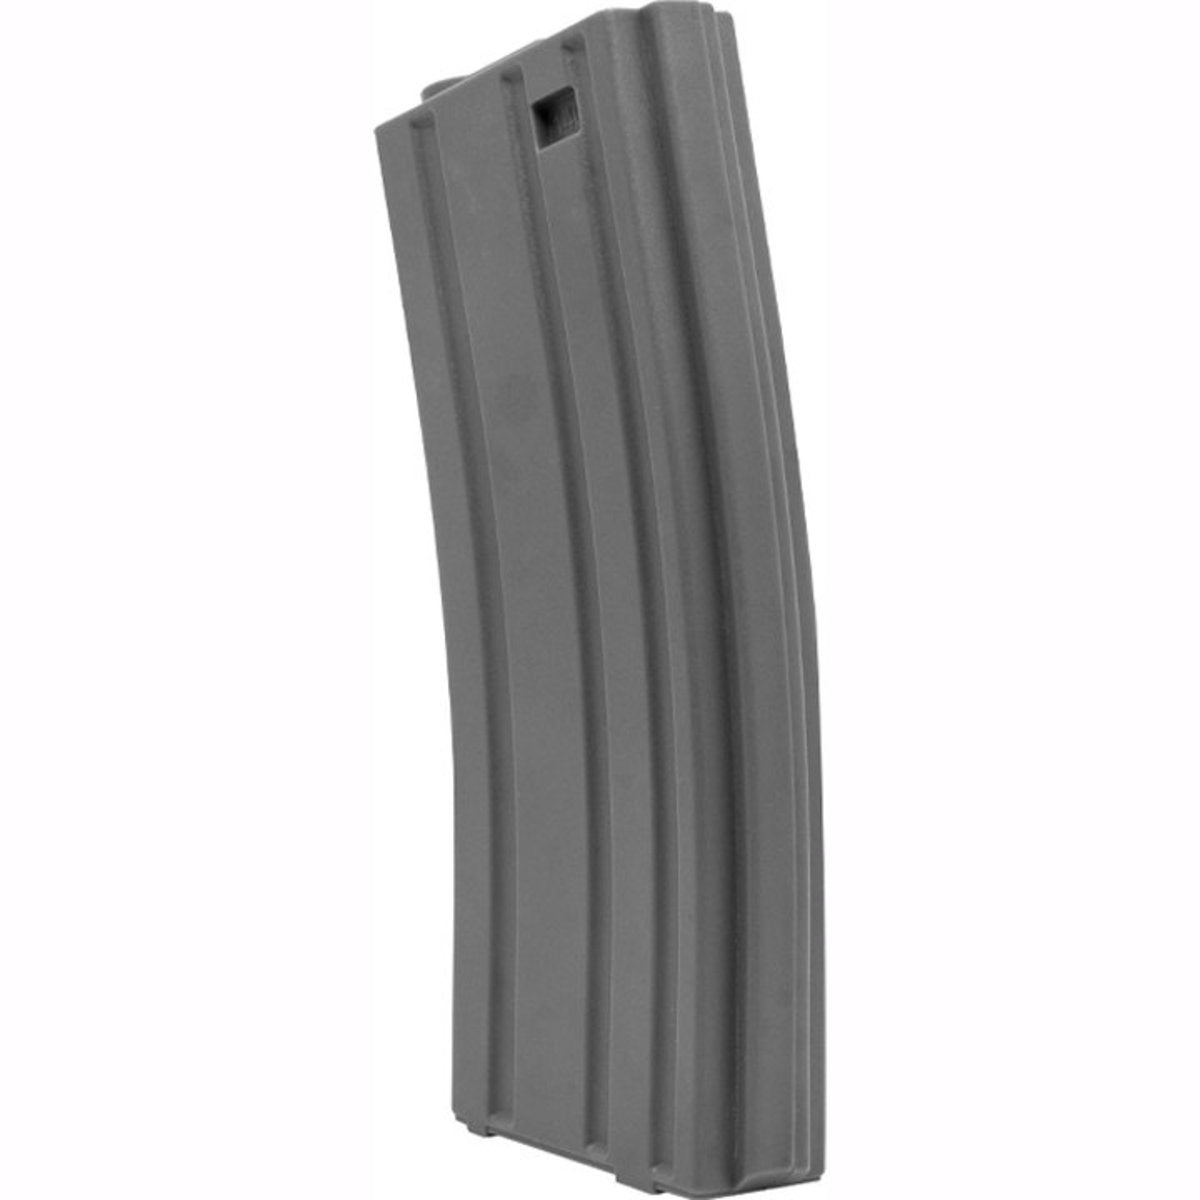 Valken 140Rd Smag Mid-Cap Airsoft Magazines - 5 Pack